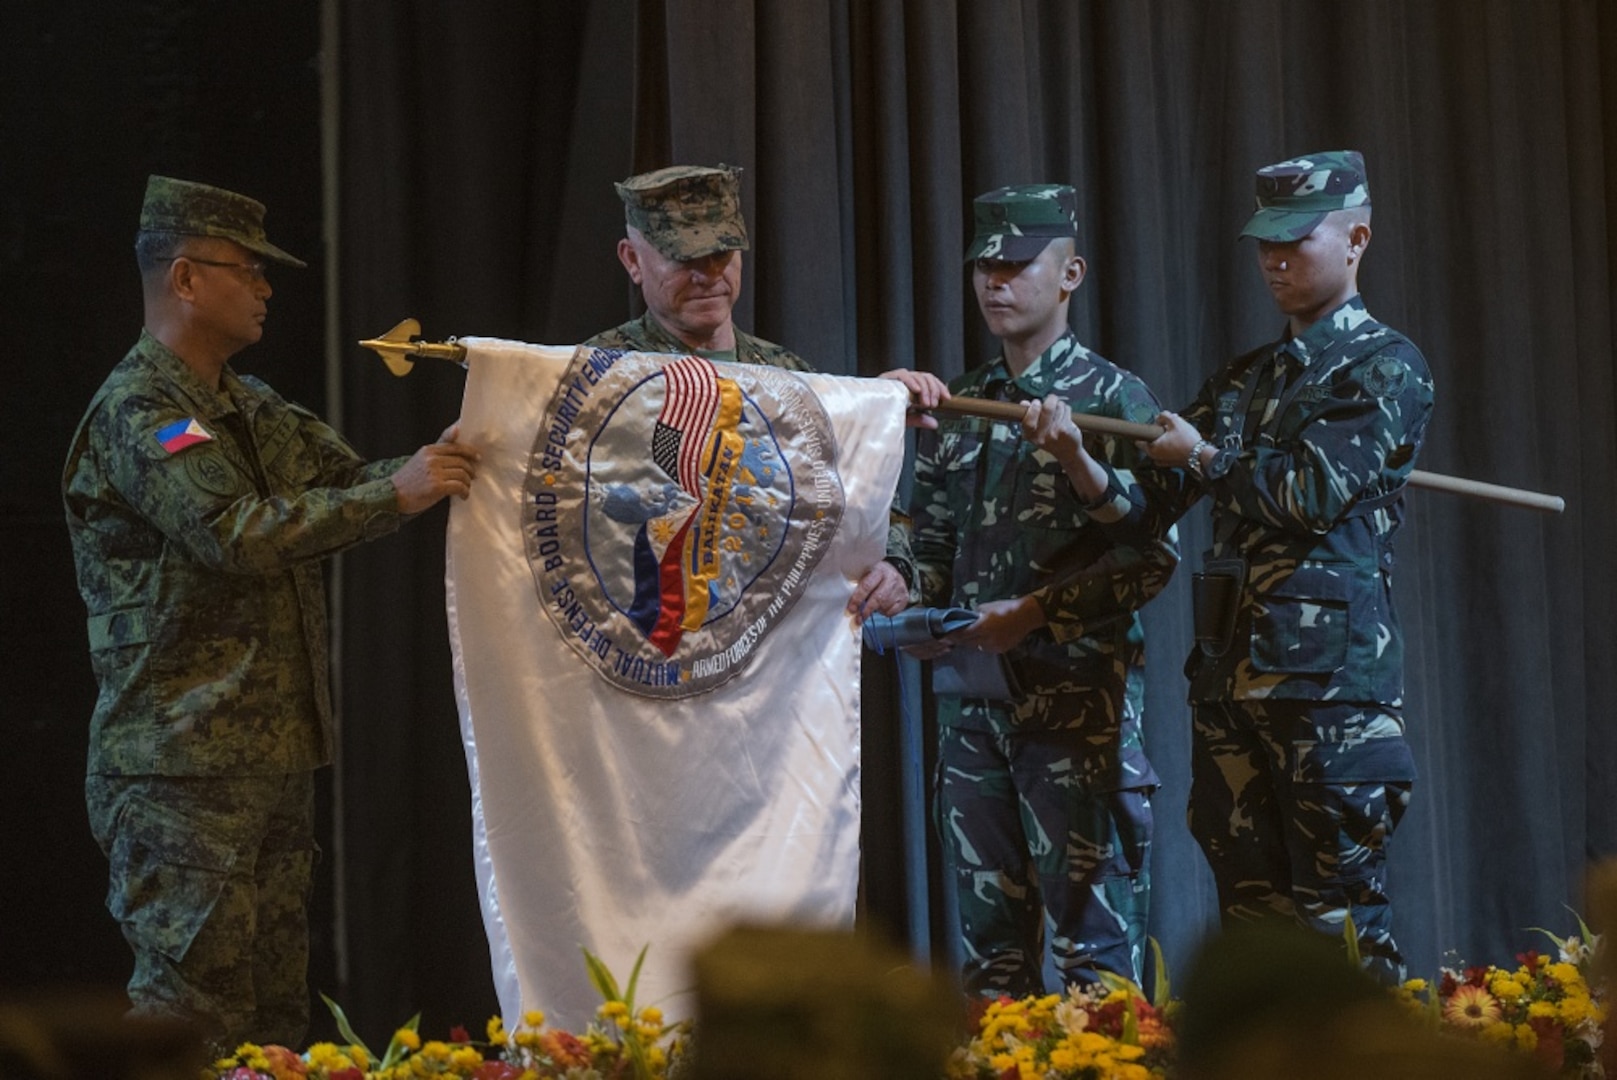 Armed Forces of the Philippines Lt. Gen. Oscar T. Lactao, left, and U.S. Marine Lt. Gen. Lawrence D. Nicholson unfurl the Balikatan 2017 flag during the opening ceremony at Camp Aguinaldo, Quezon City, May 8, 2017. Lactao is the Philippine exercise director for Balikatan and Nicholson is the commanding general of III Marine Expeditionary Force. Balikatan is an annual U.S.-Philippine bilateral military exercise focused on a variety of missions including humanitarian and disaster relief, counterterrorism, and other combined military operations.